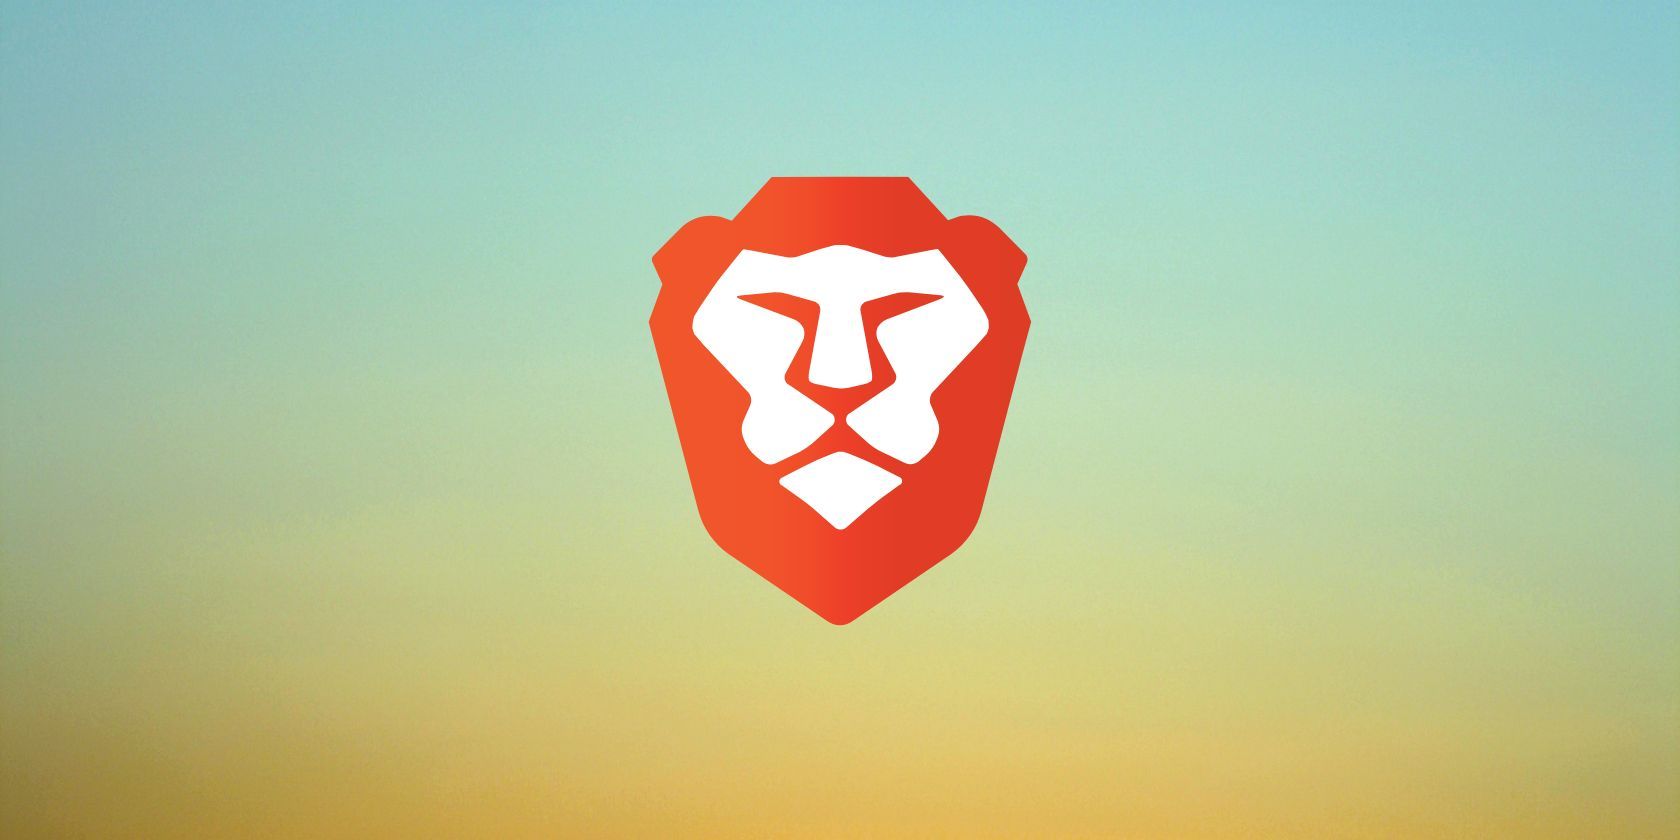 Brave browser logo is seen on colorful background resembling sunset